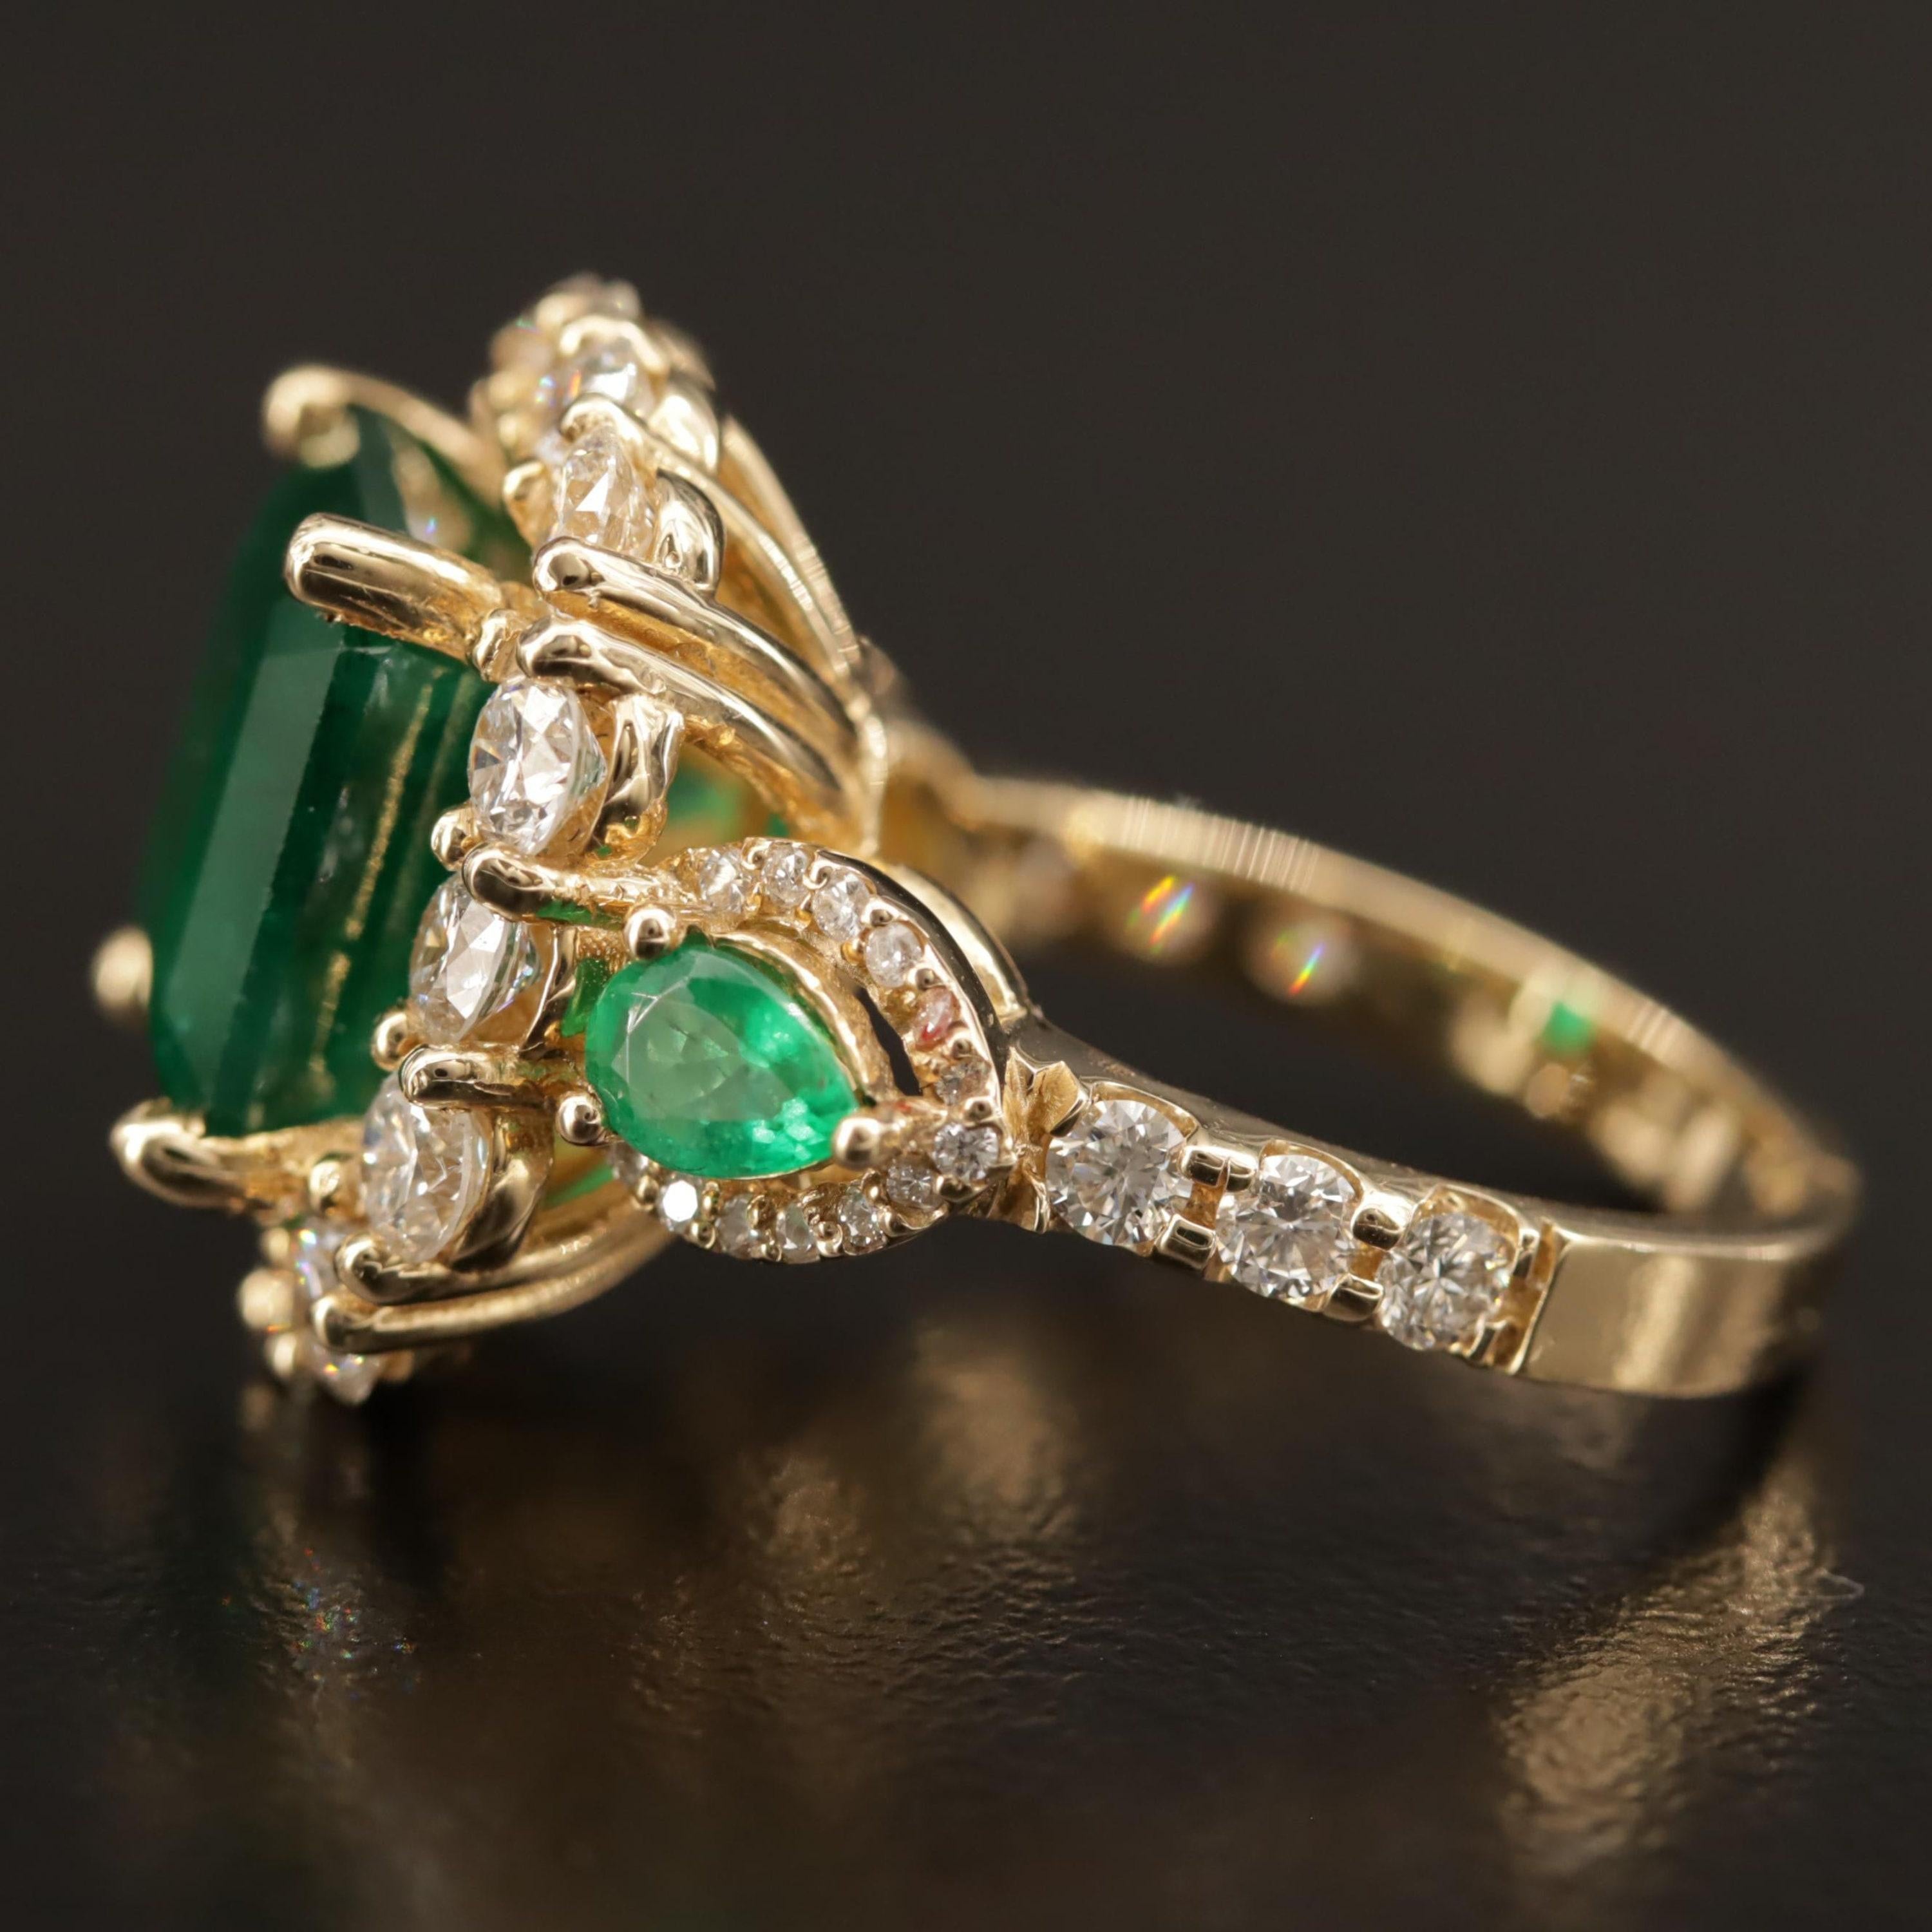 For Sale:  Art Deco 3 Carat Natural Emerald Diamond Cocktail Ring, 18K Gold Engagement Ring 2